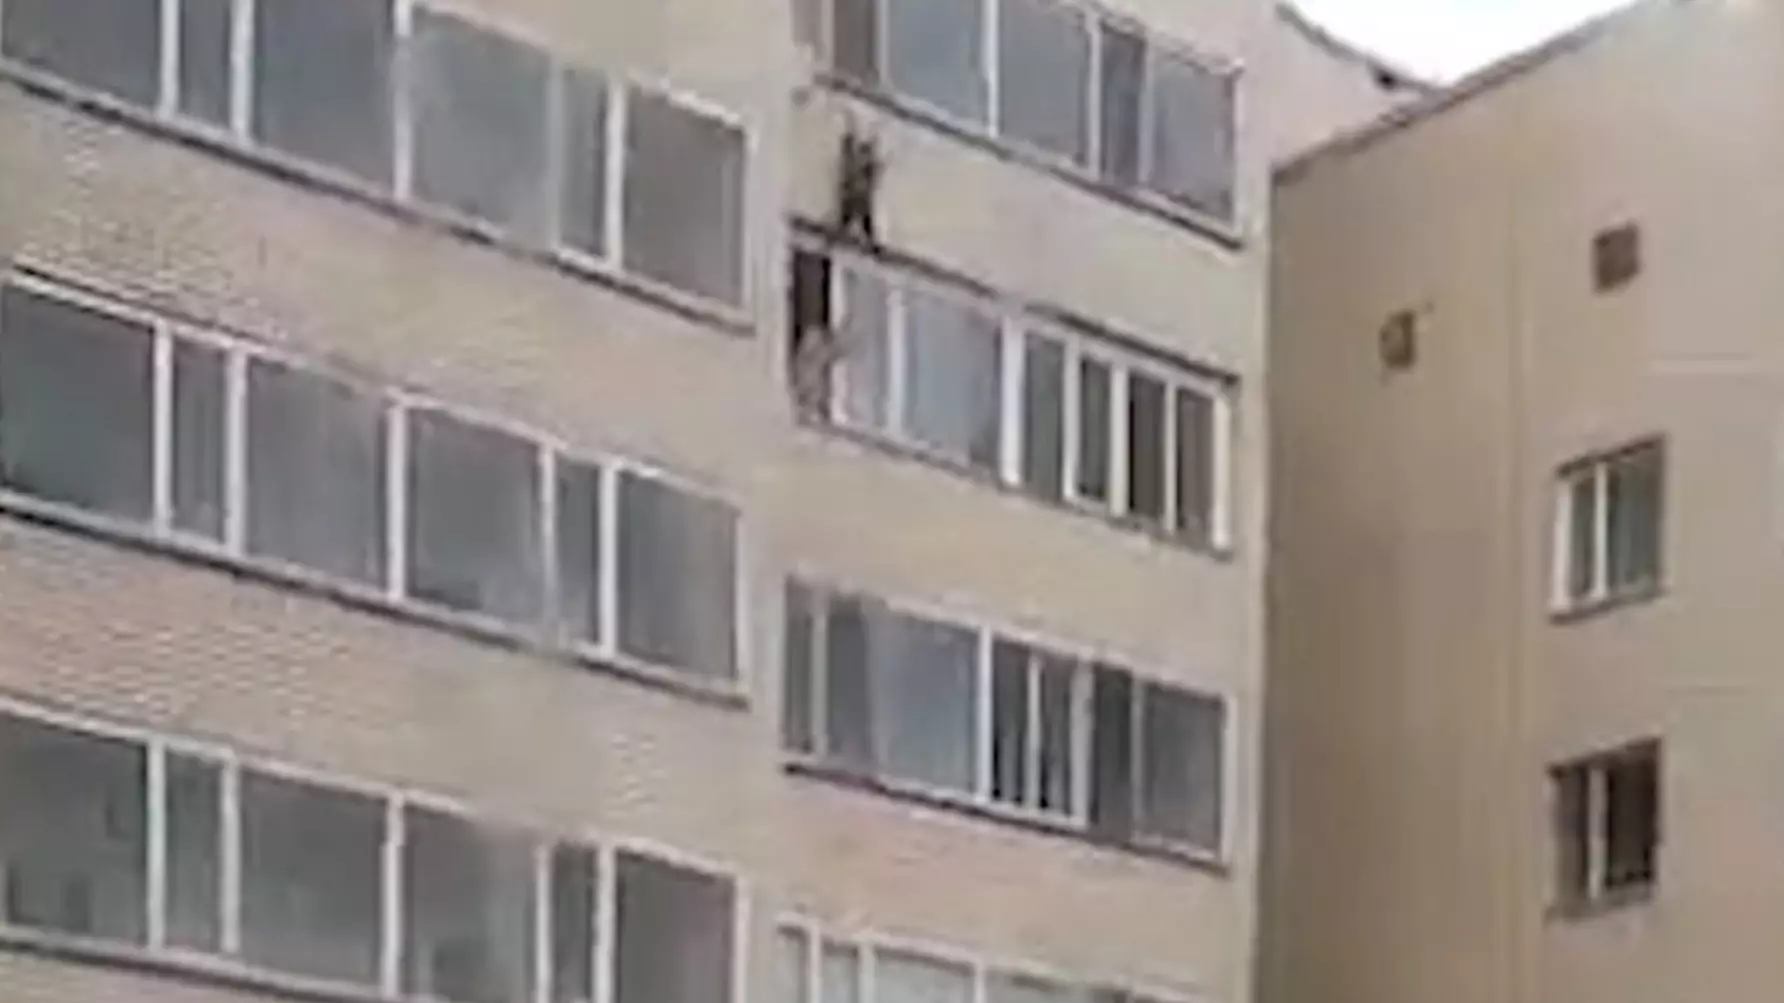 Hero Catches Boy Falling From 10th Floor